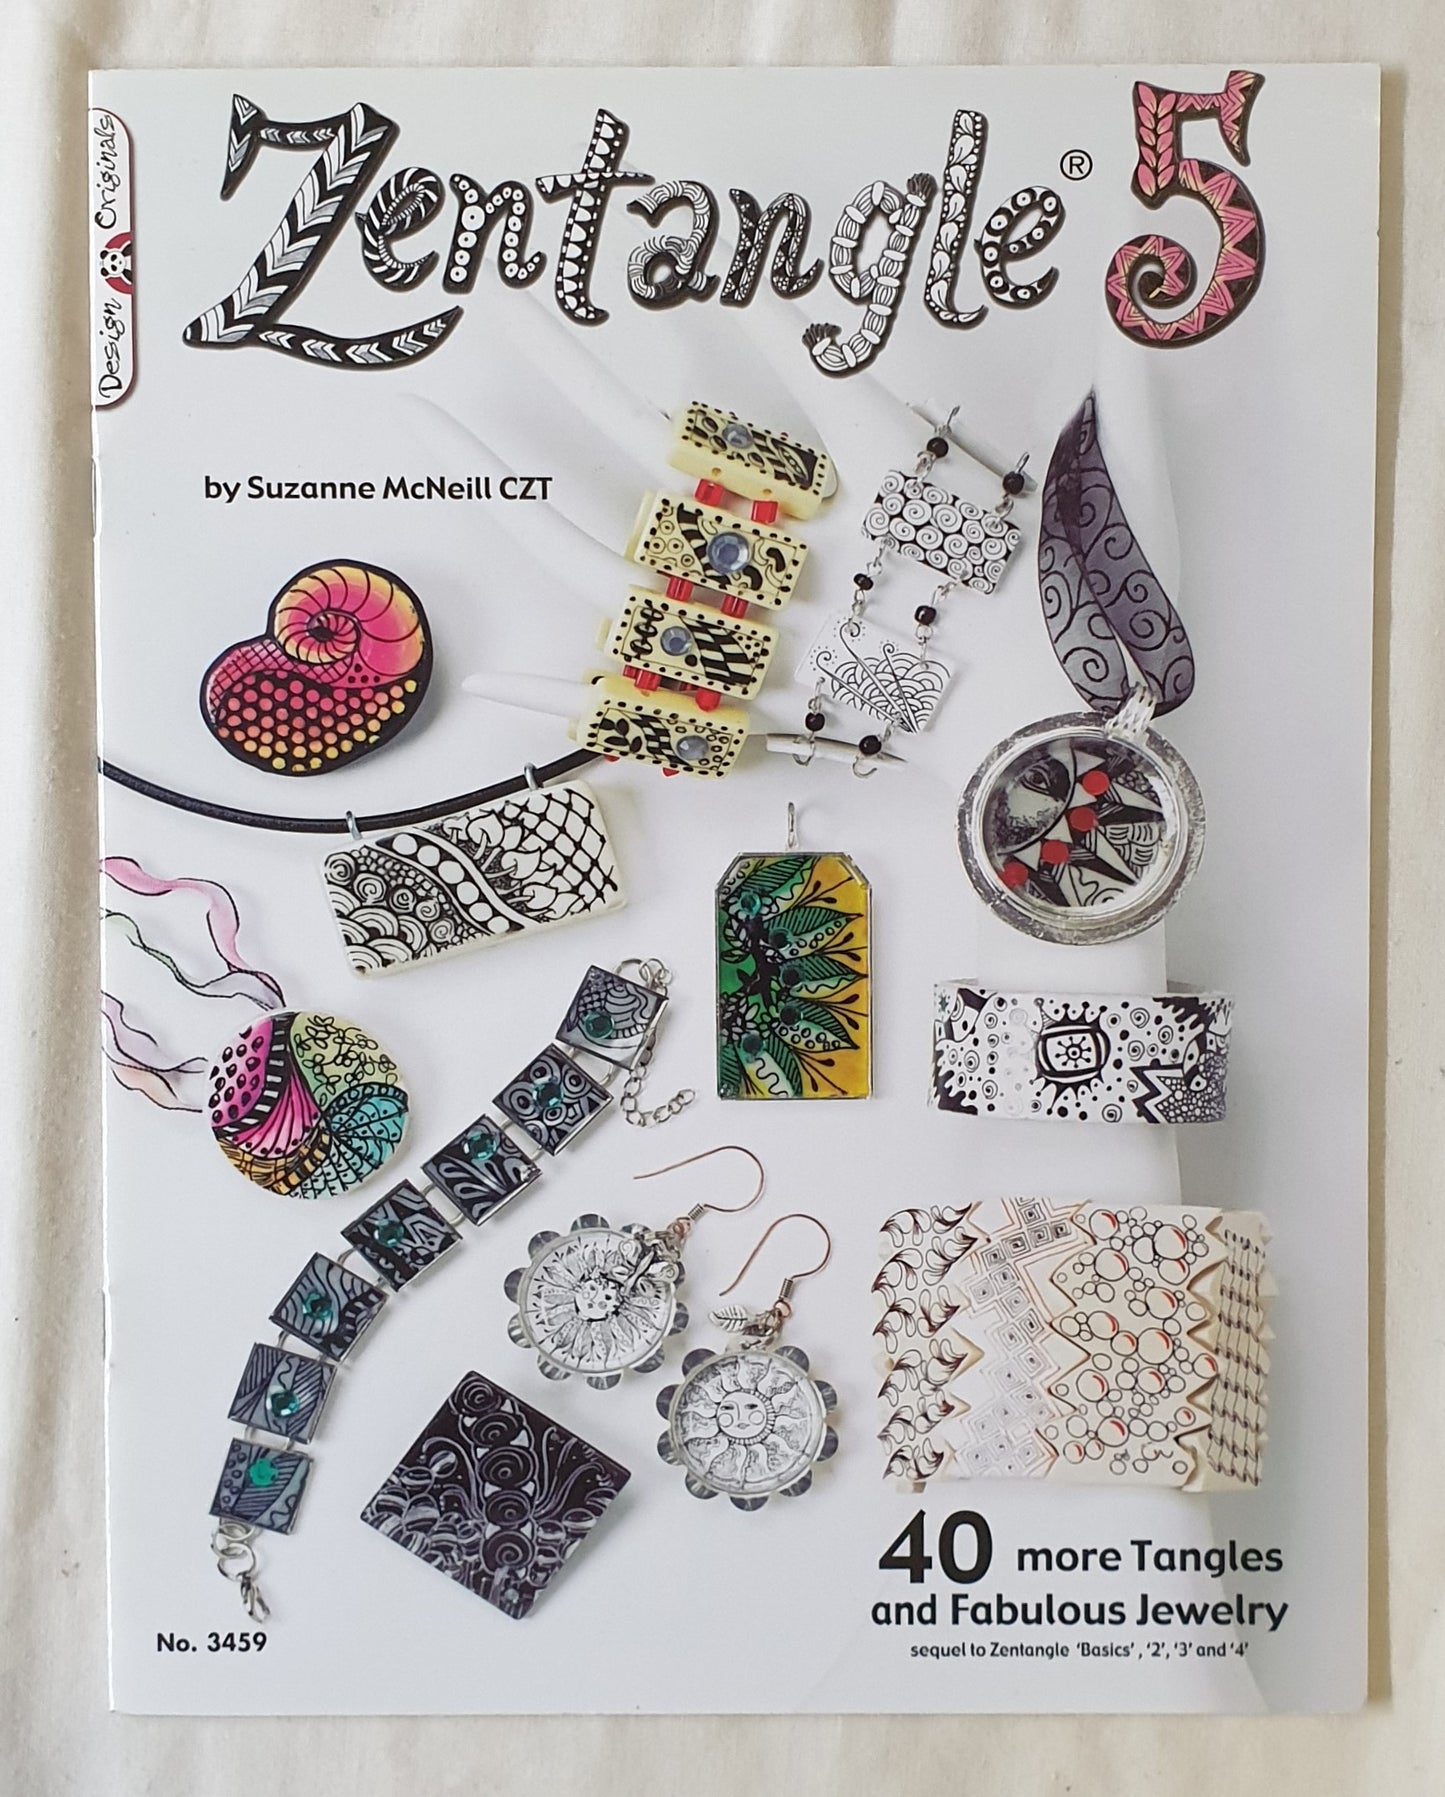 Zentangle 5  40 more tangles and Fabulous Jewelry  by Suzanne MCNeill